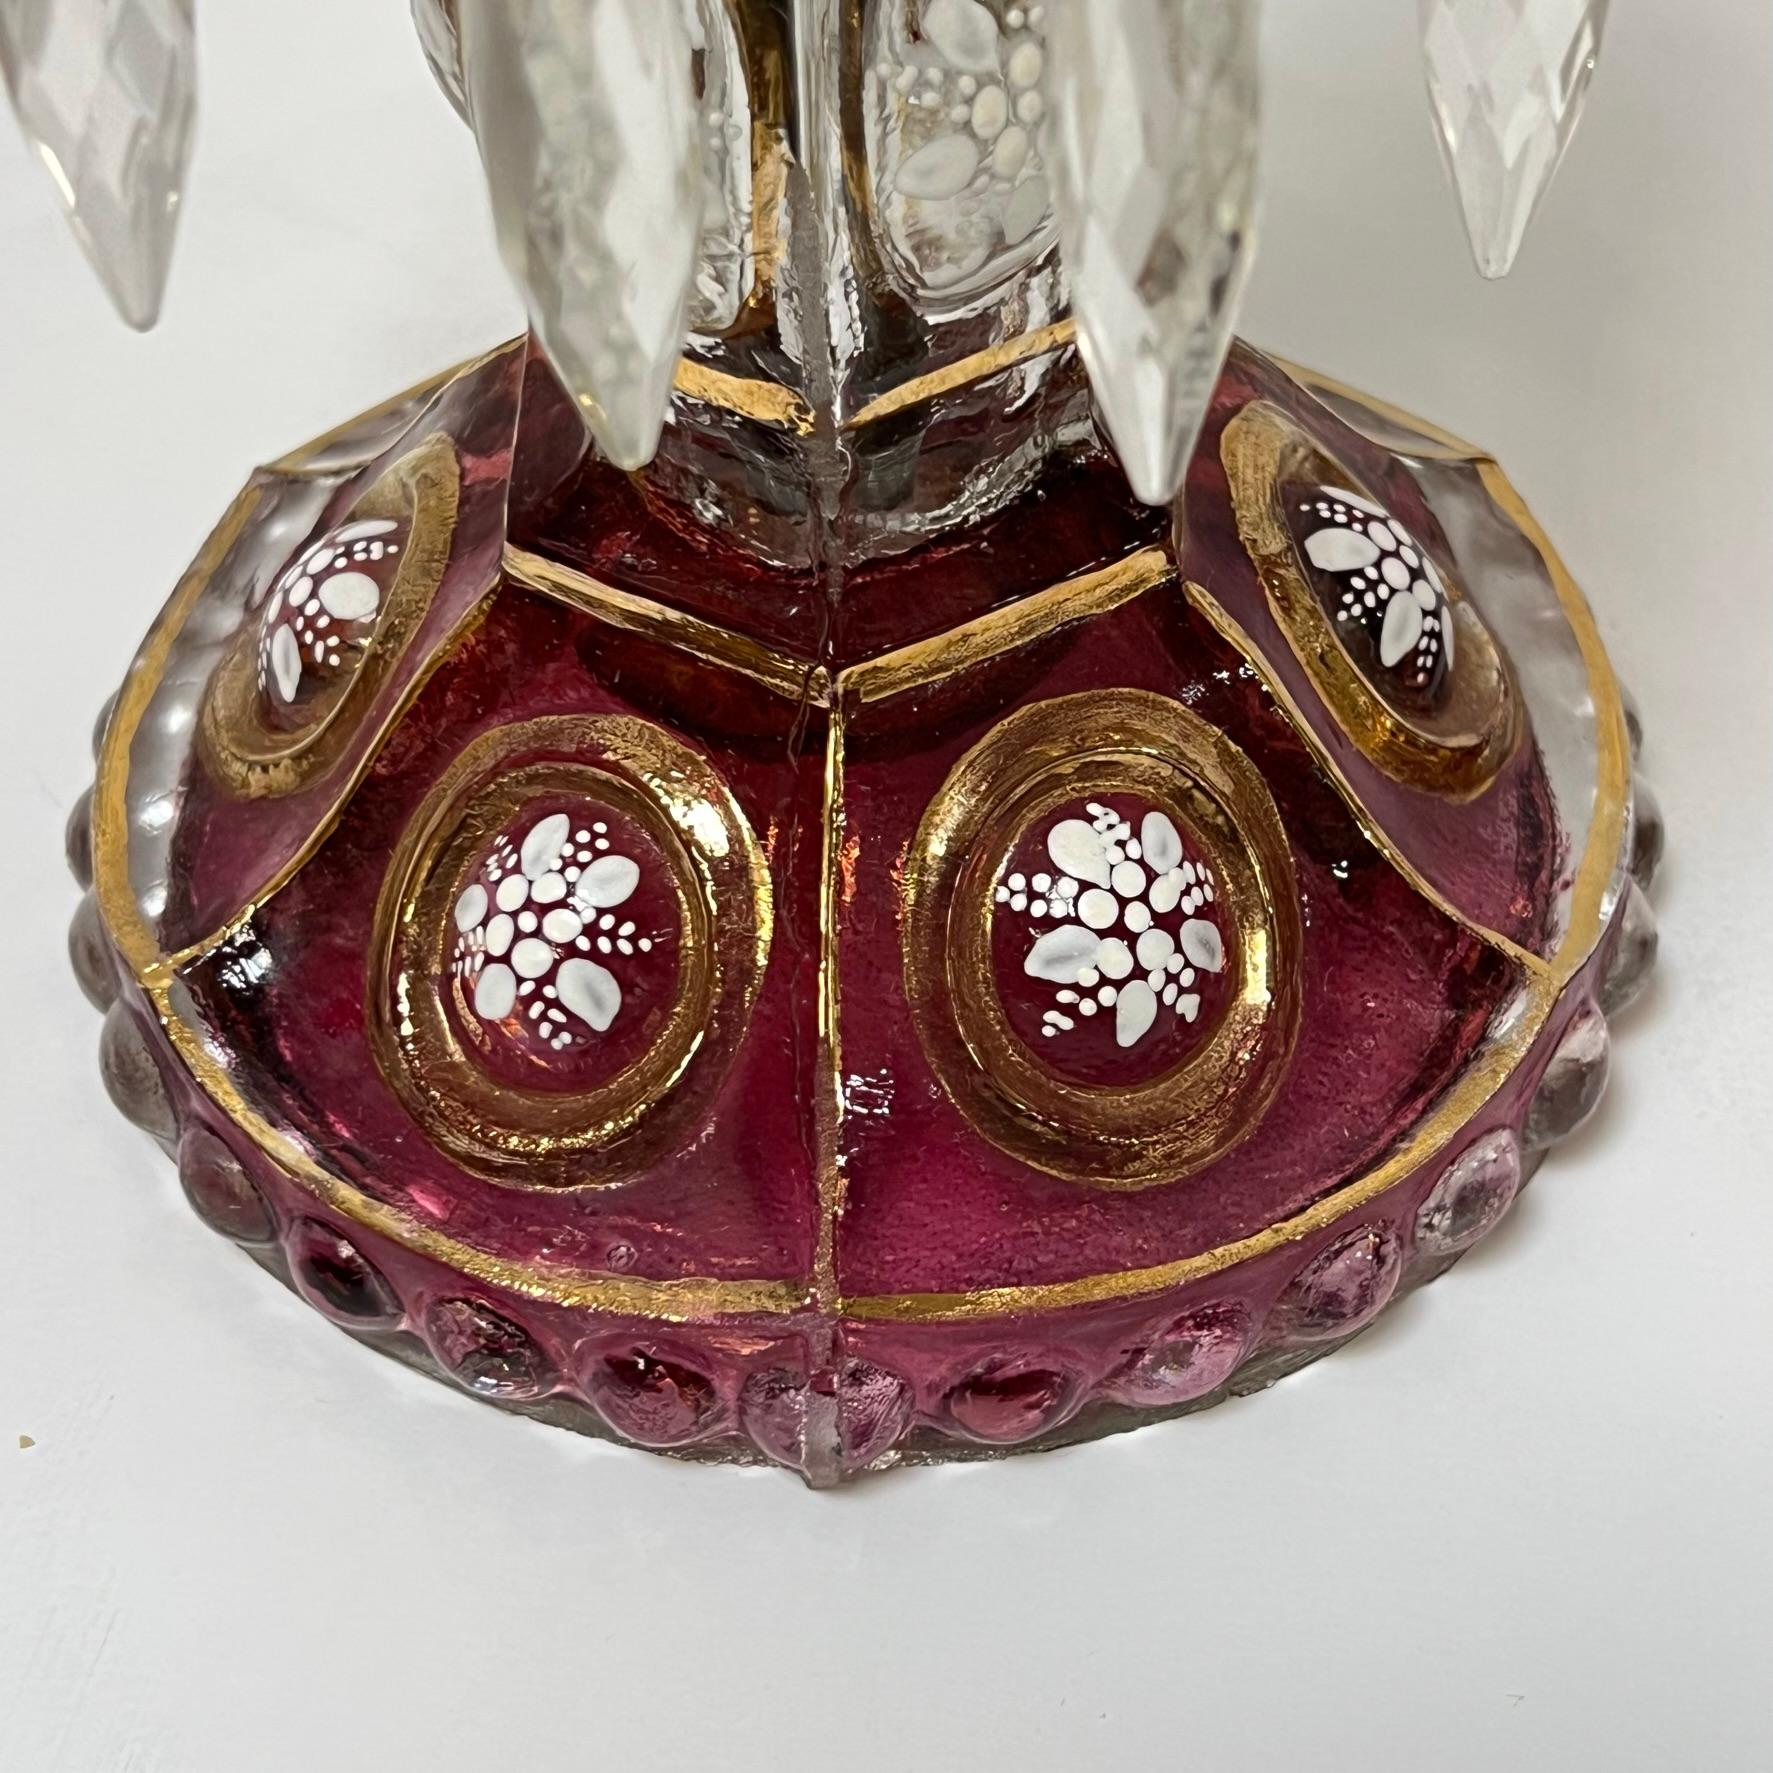 Pair of mid century  candle holders in ruby red glass with gilt and white hand-painted floral designs, and hurricane shades in red-flashed glass with fine painted designs, and gilt engraved designs.  Each in very good condition. 